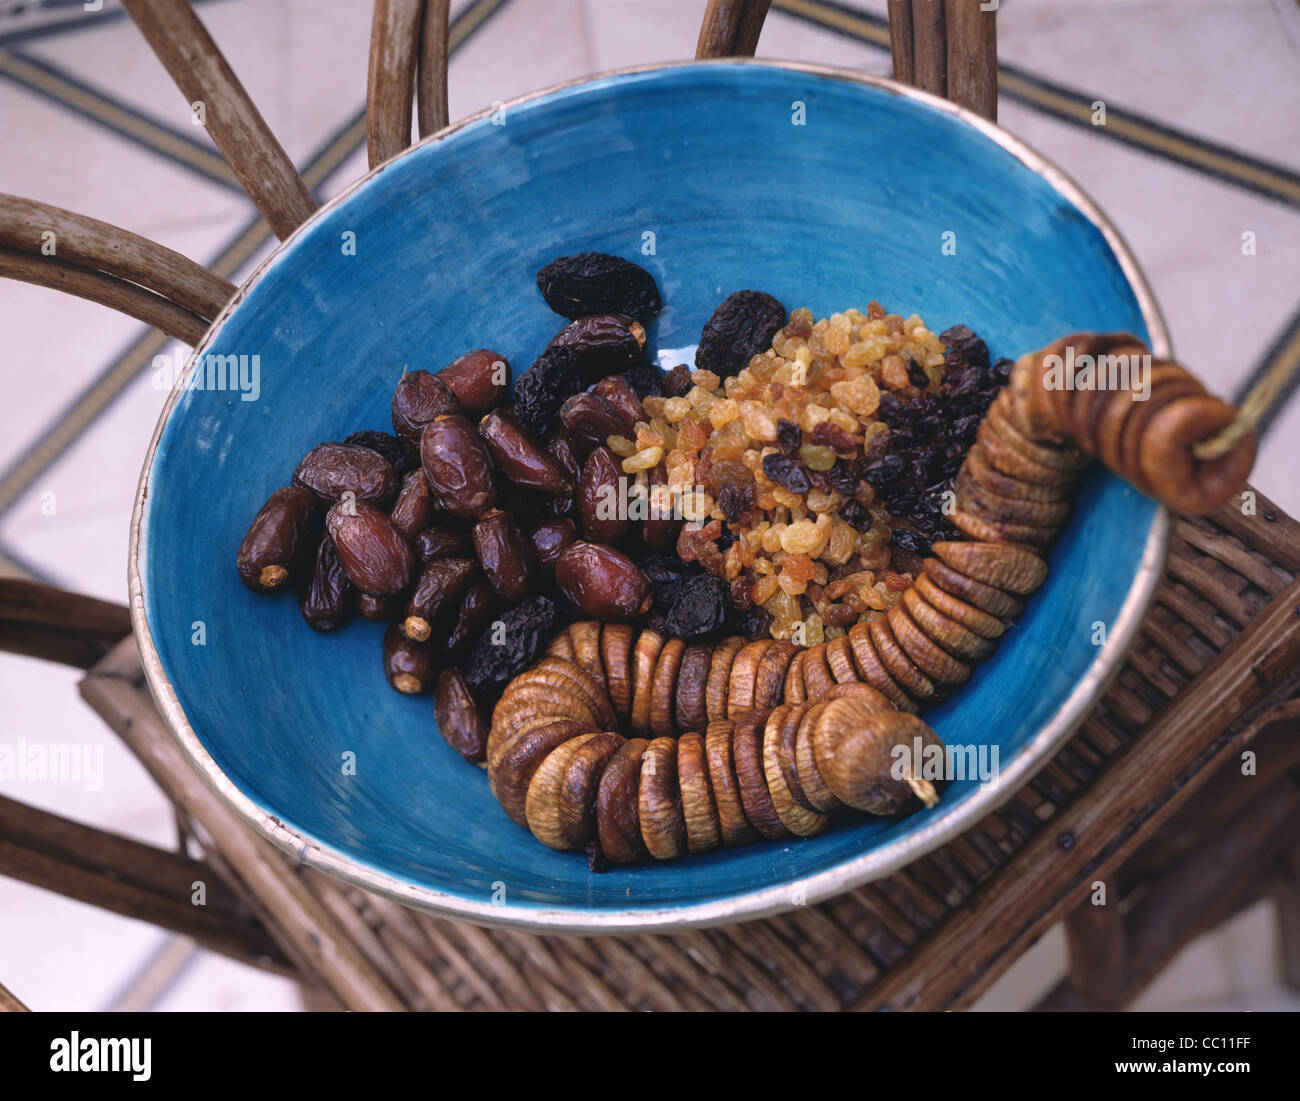 Still Dried fruits: figs, dates, raisins, currants and plums Stock Photo